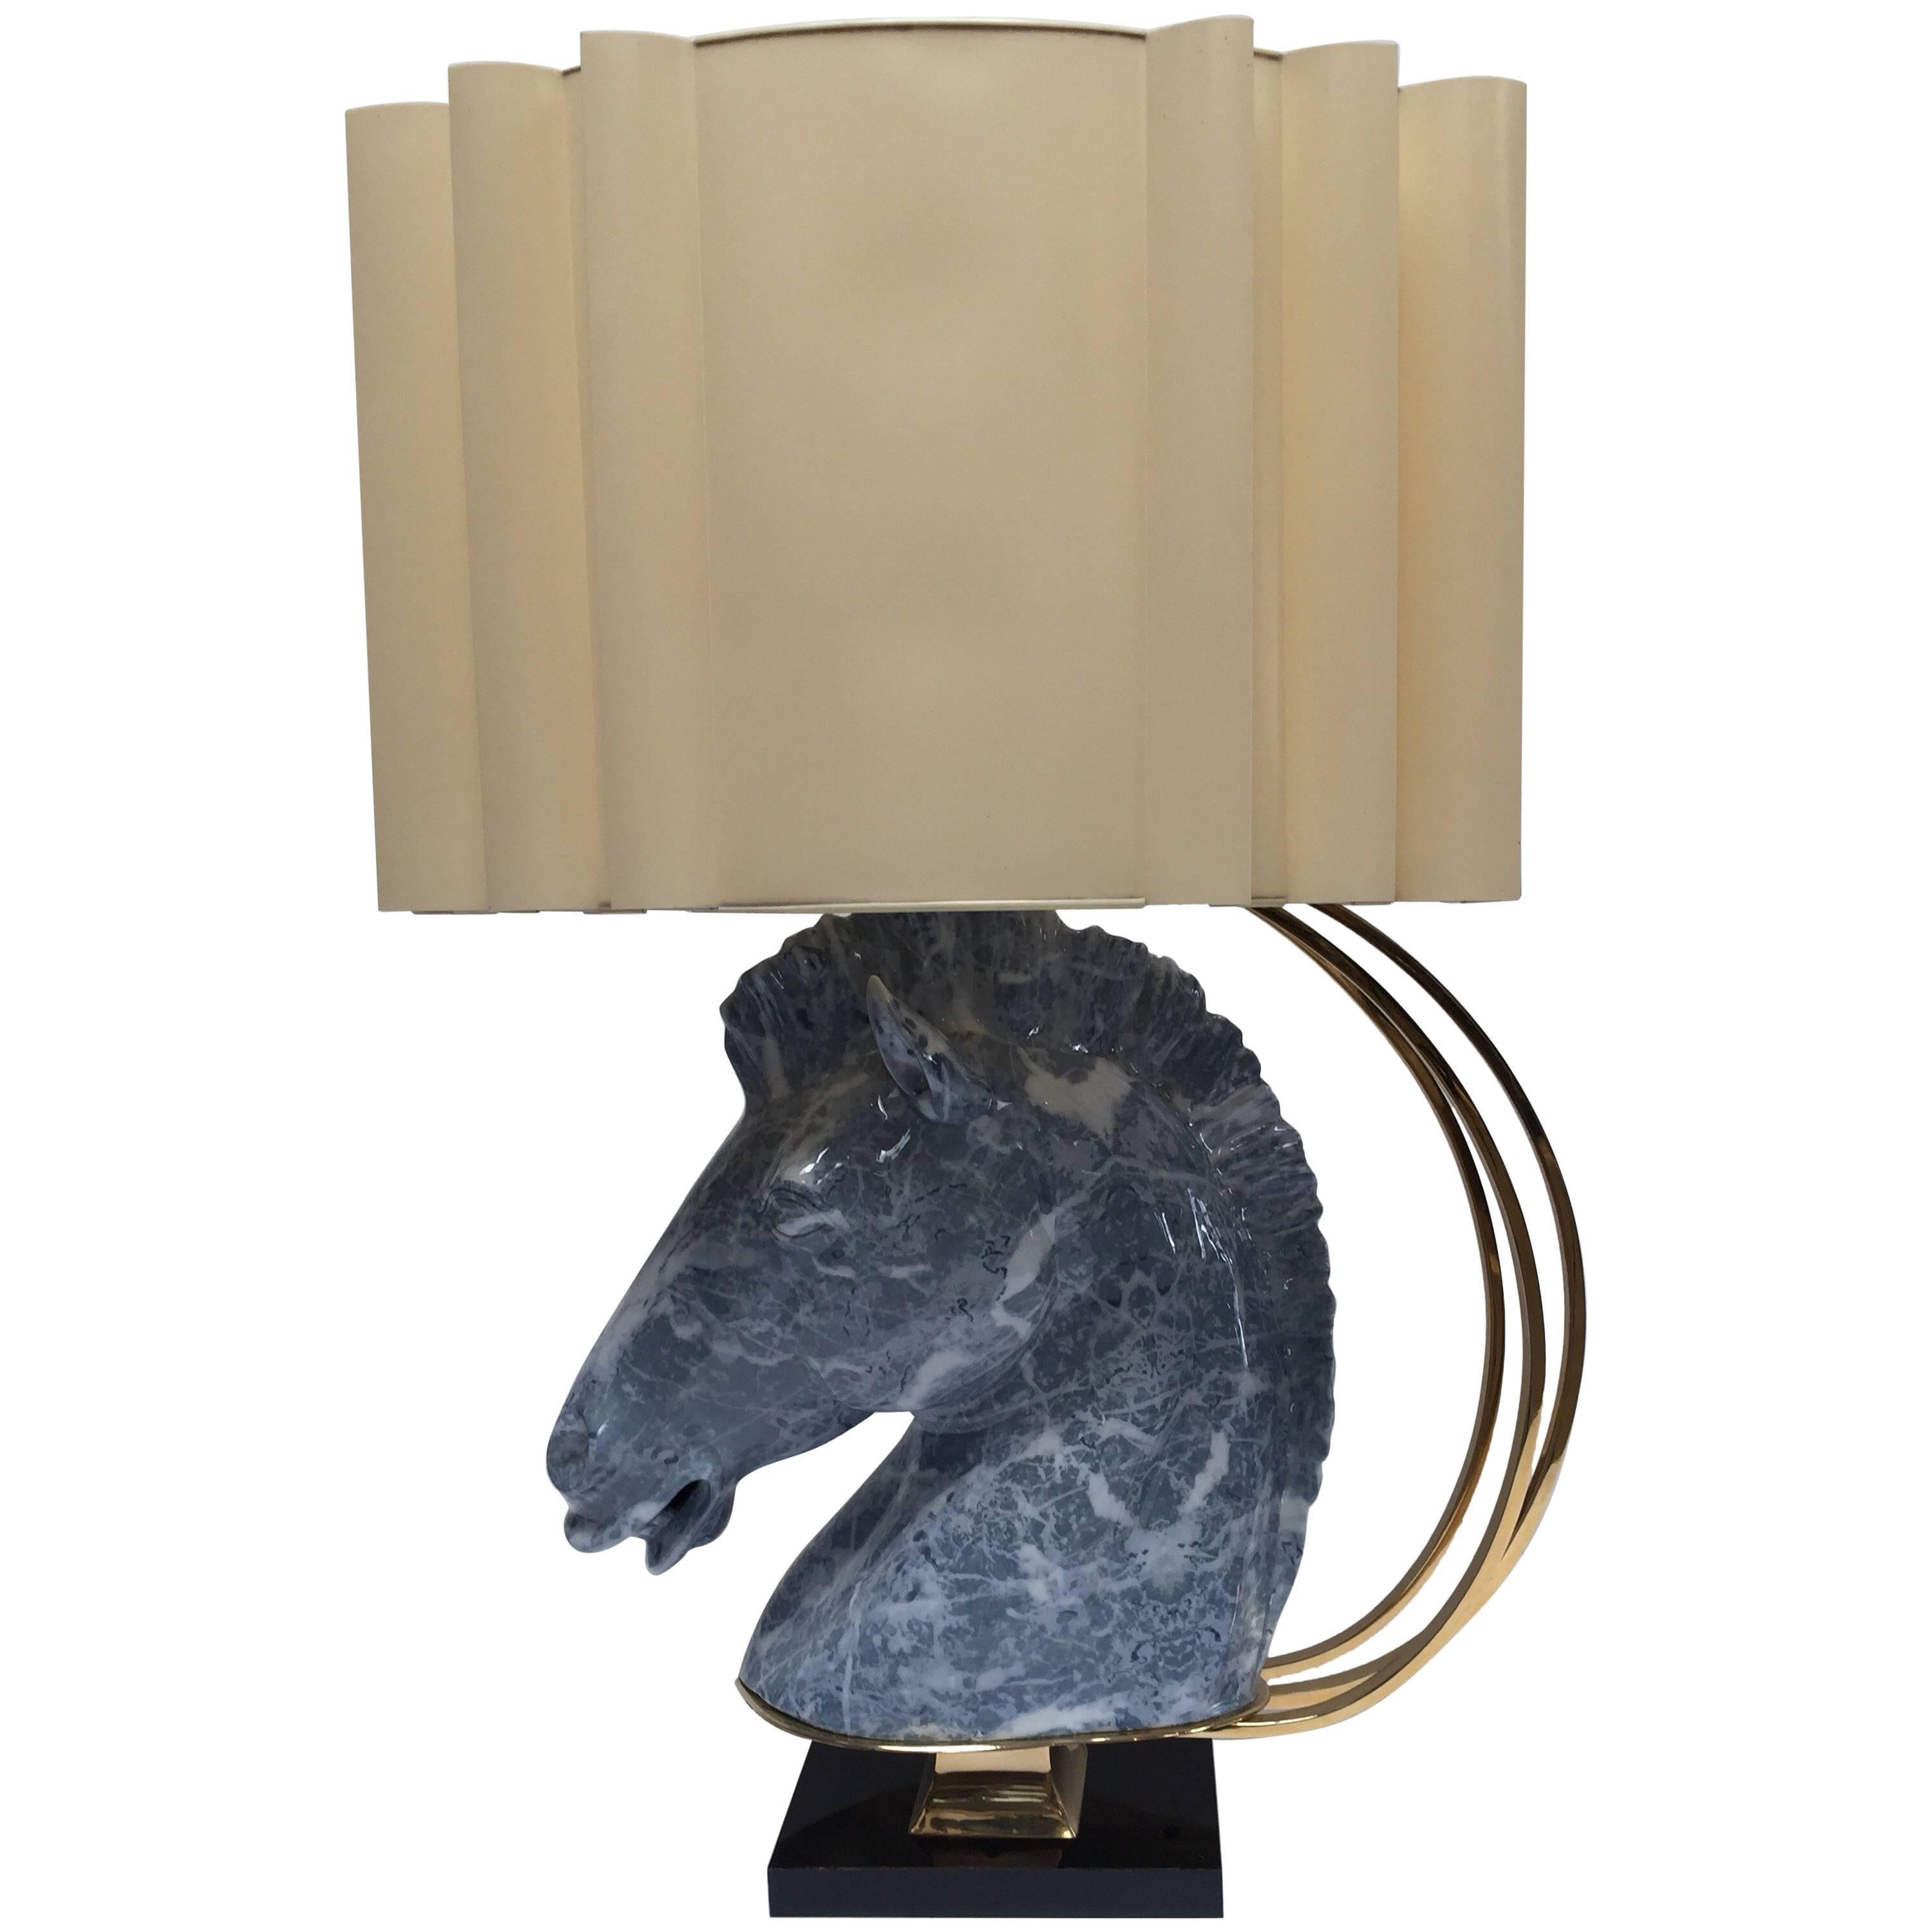 Large Sculptural Art Deco Ceramic Horse Bust Table Lamp with Brass Accent